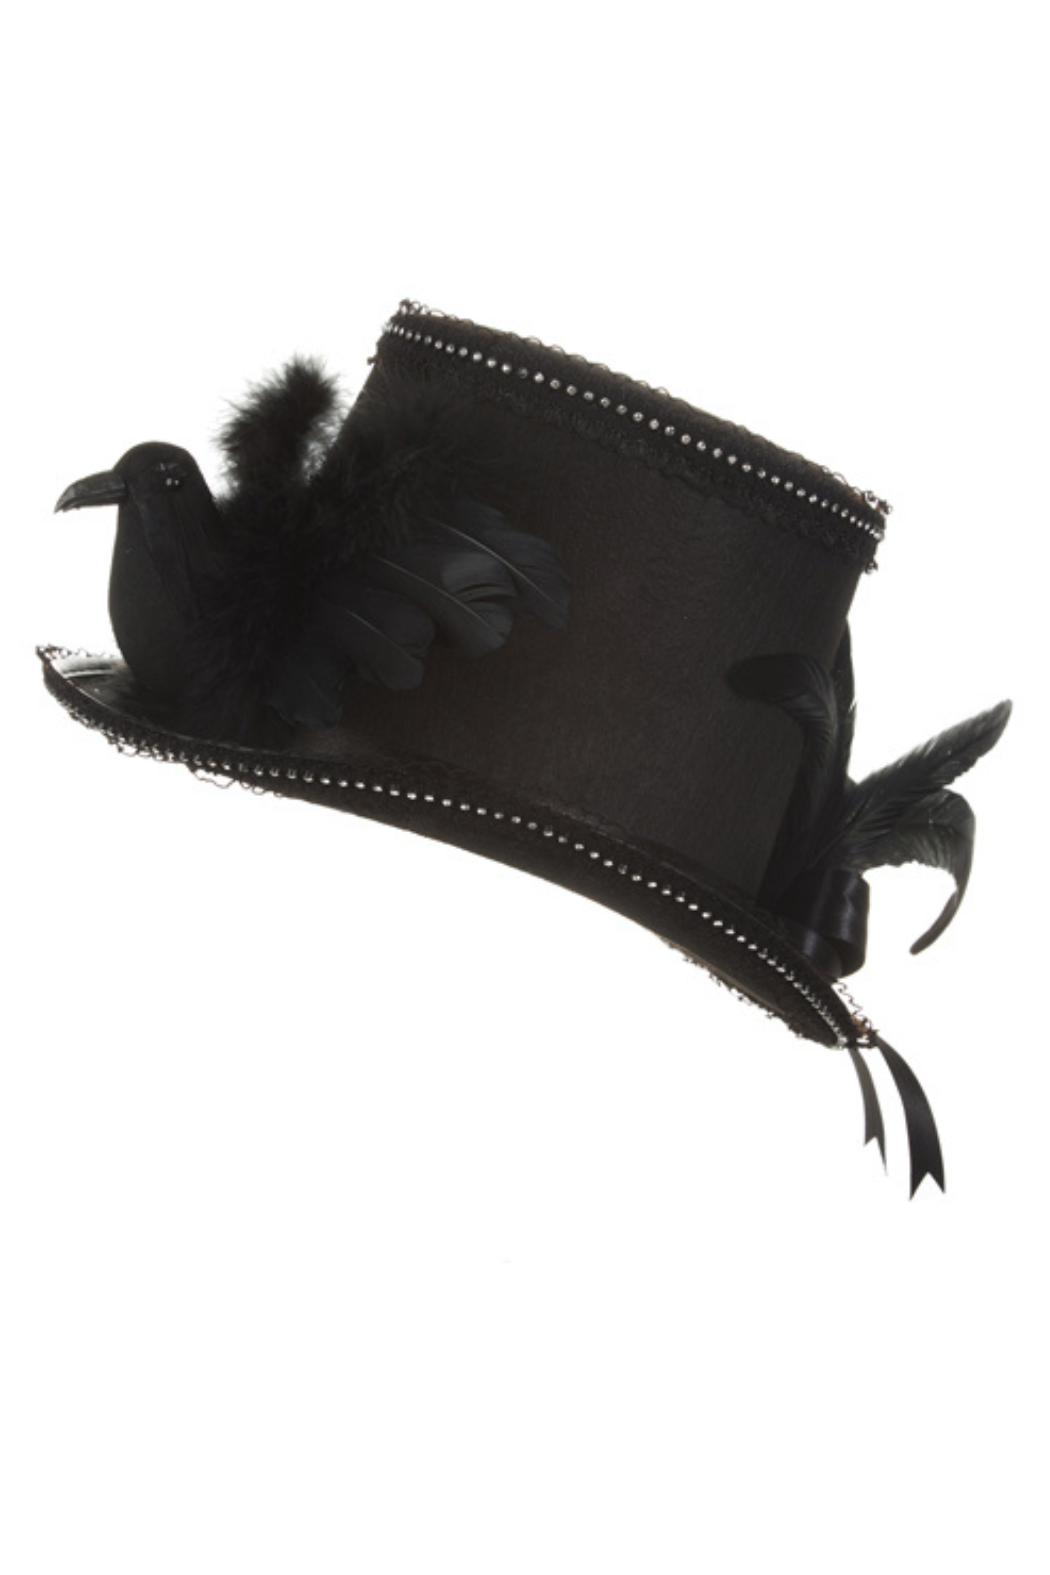 Black Feather Trim Witch Hat